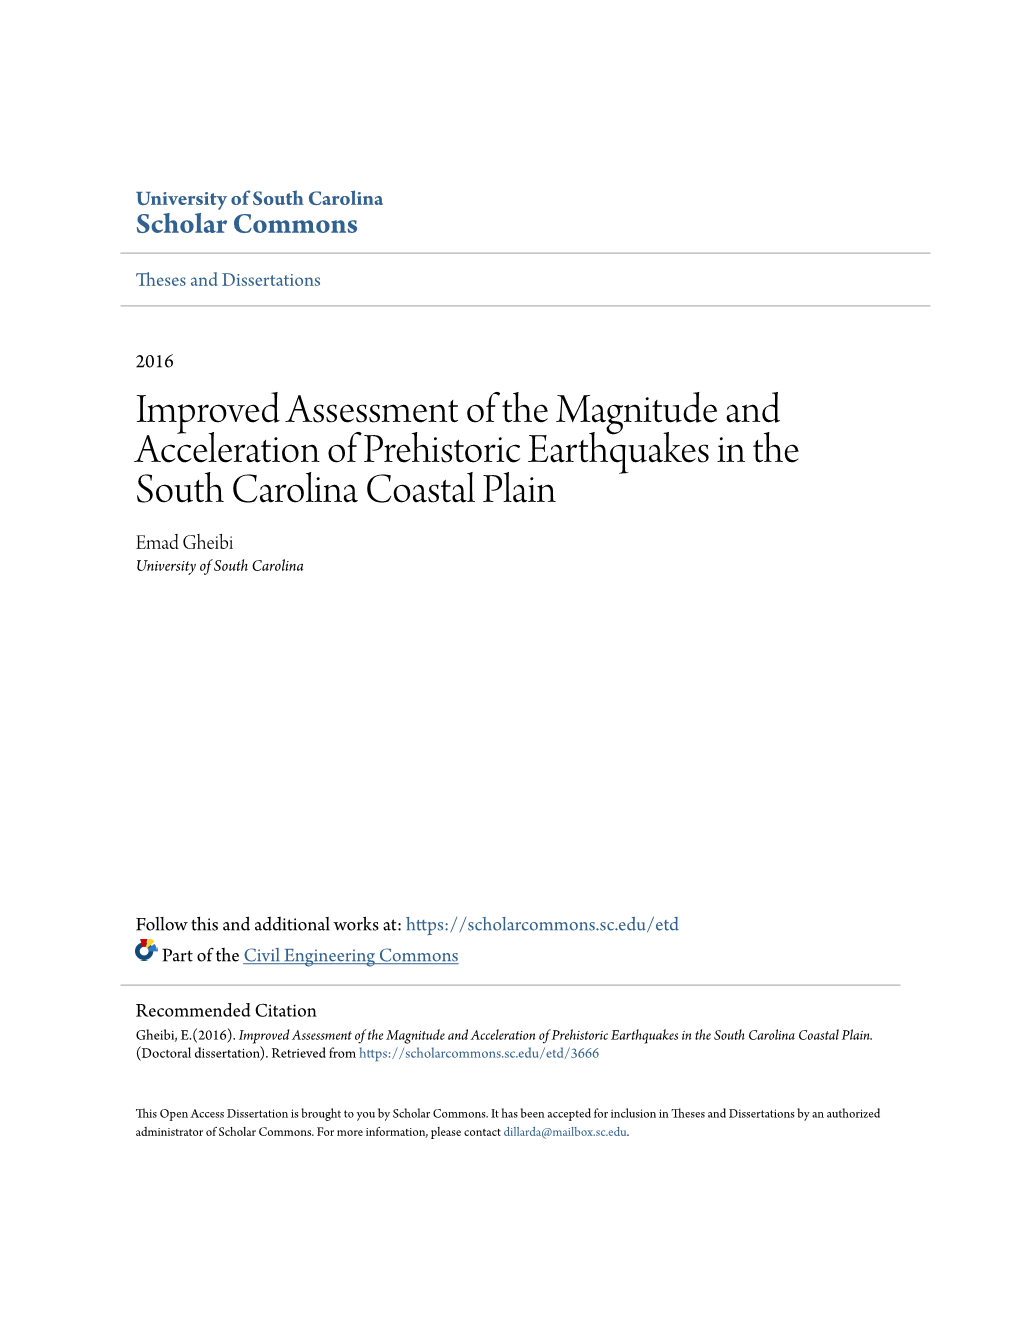 Improved Assessment of the Magnitude and Acceleration of Prehistoric Earthquakes in the South Carolina Coastal Plain Emad Gheibi University of South Carolina